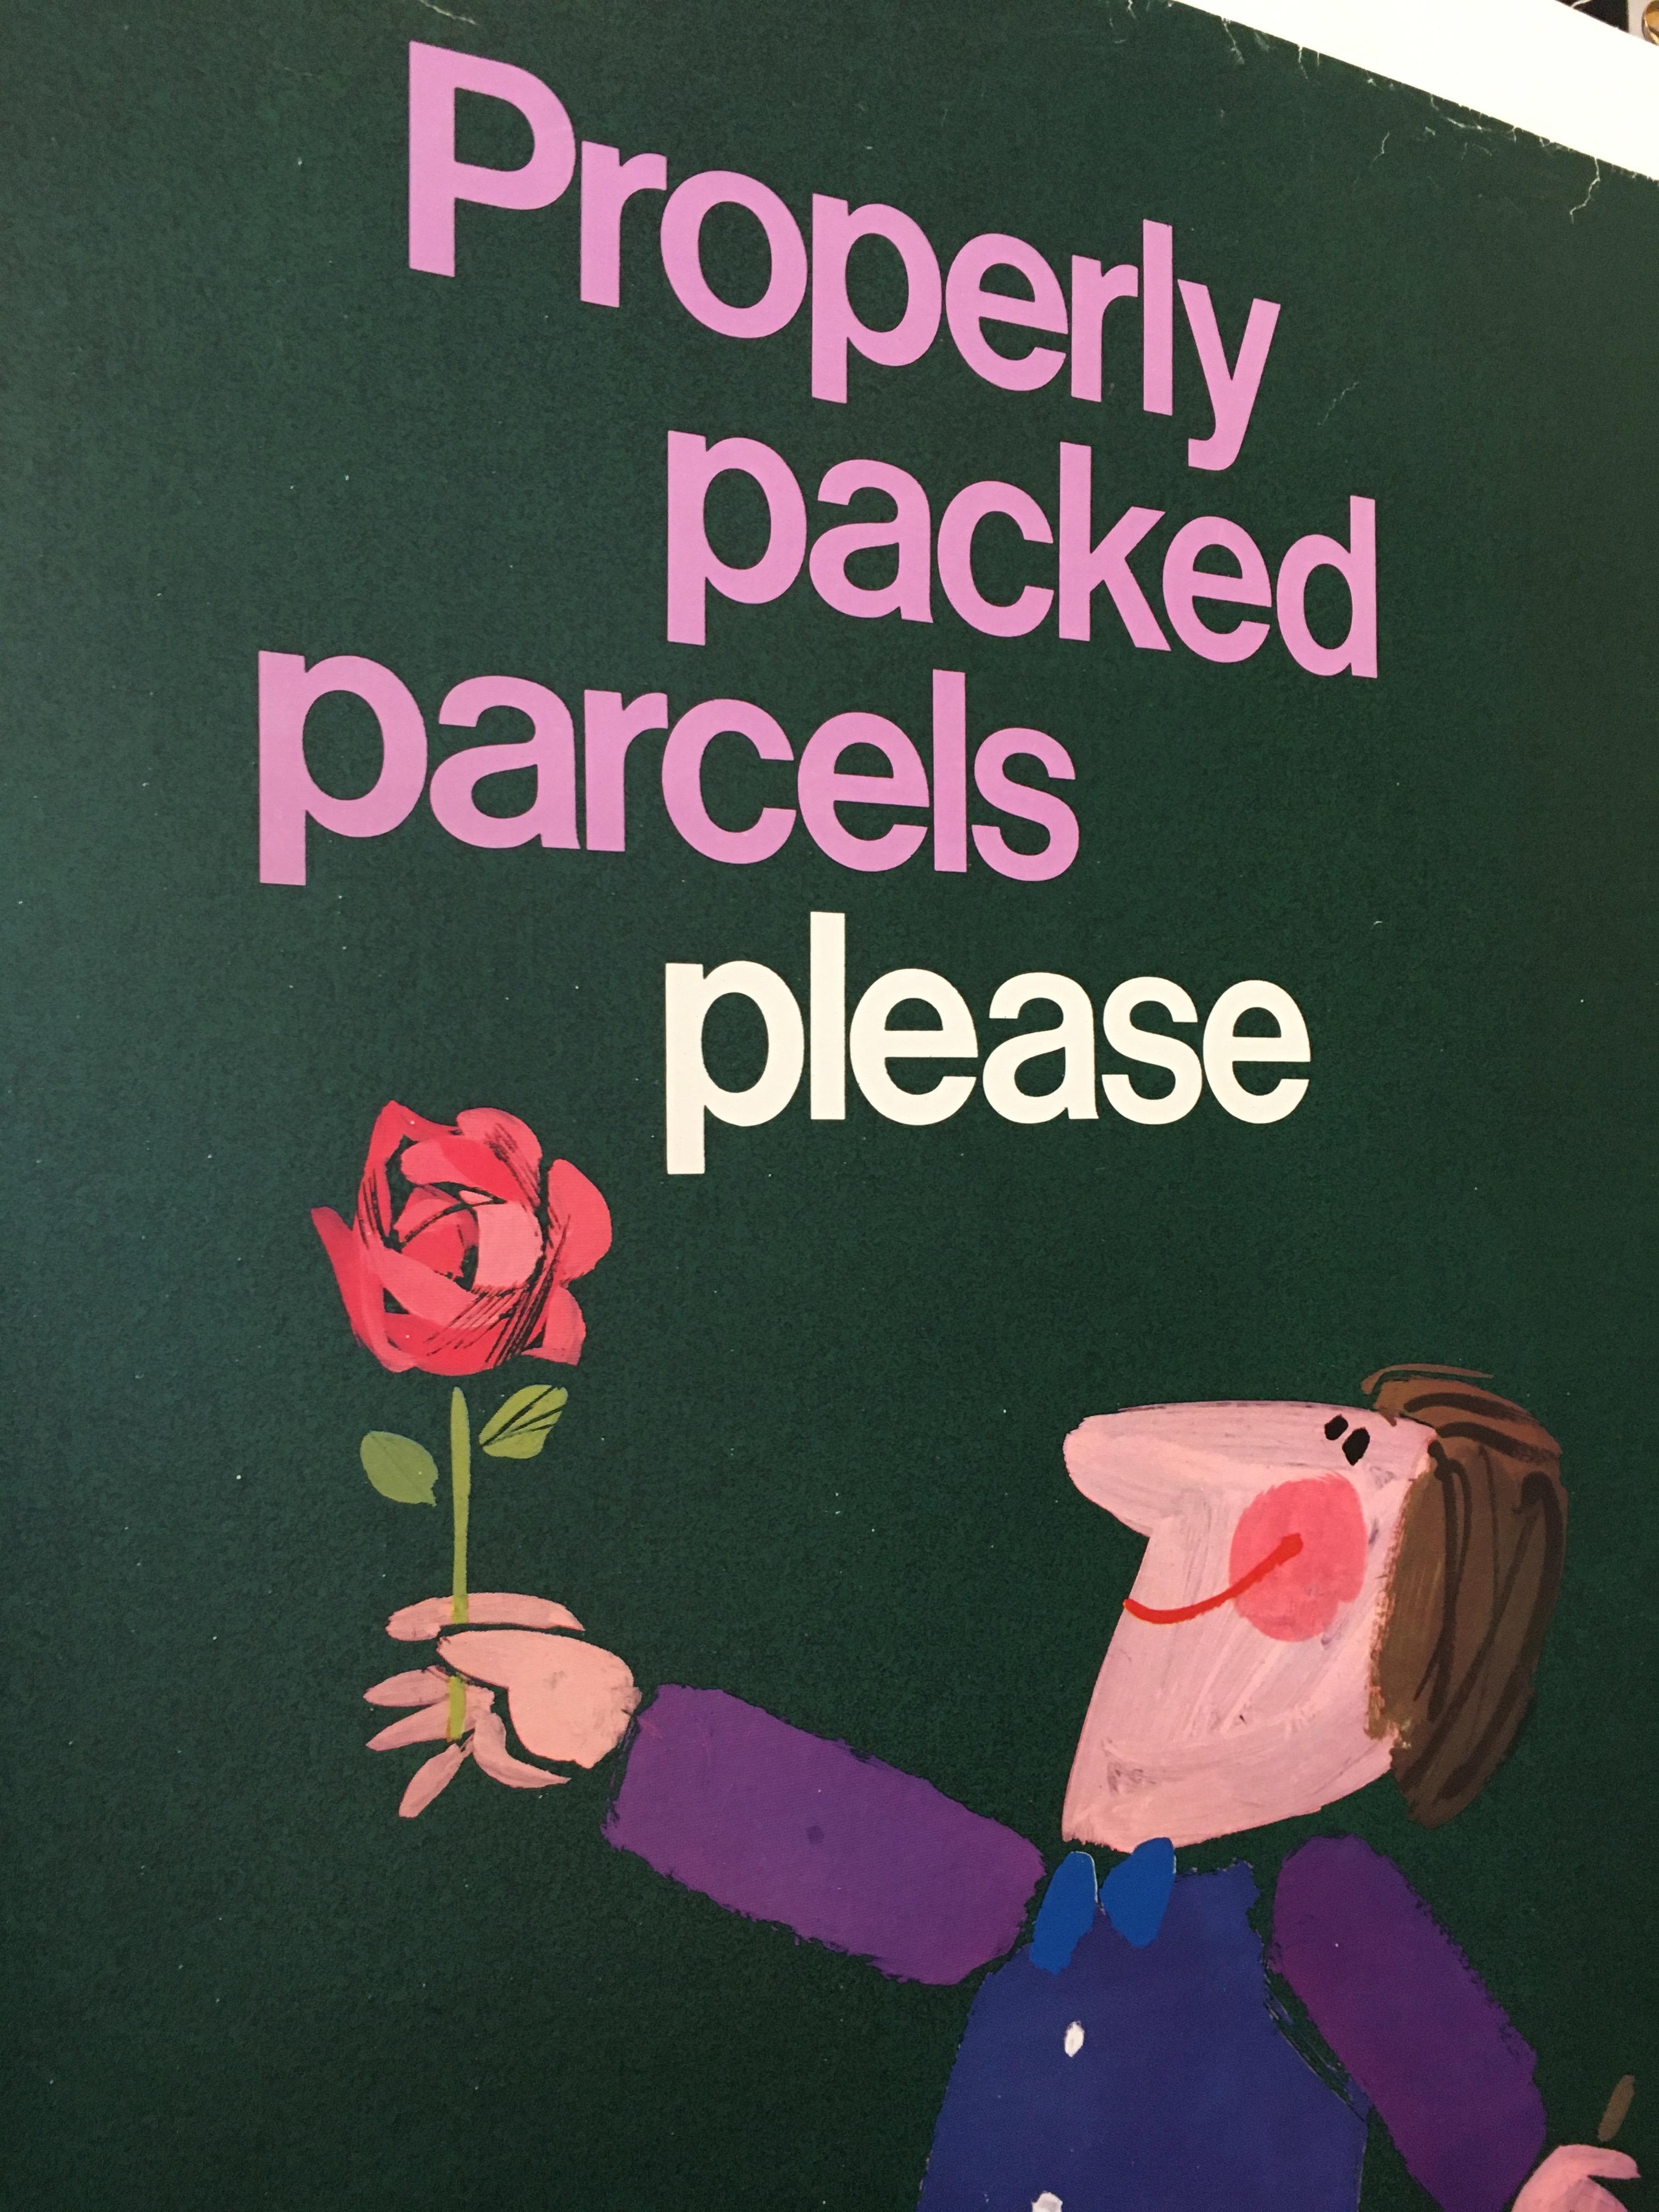 Paper Properly Packed Parcels Please, GPO Statue Original Vintage Poster, circa 1960